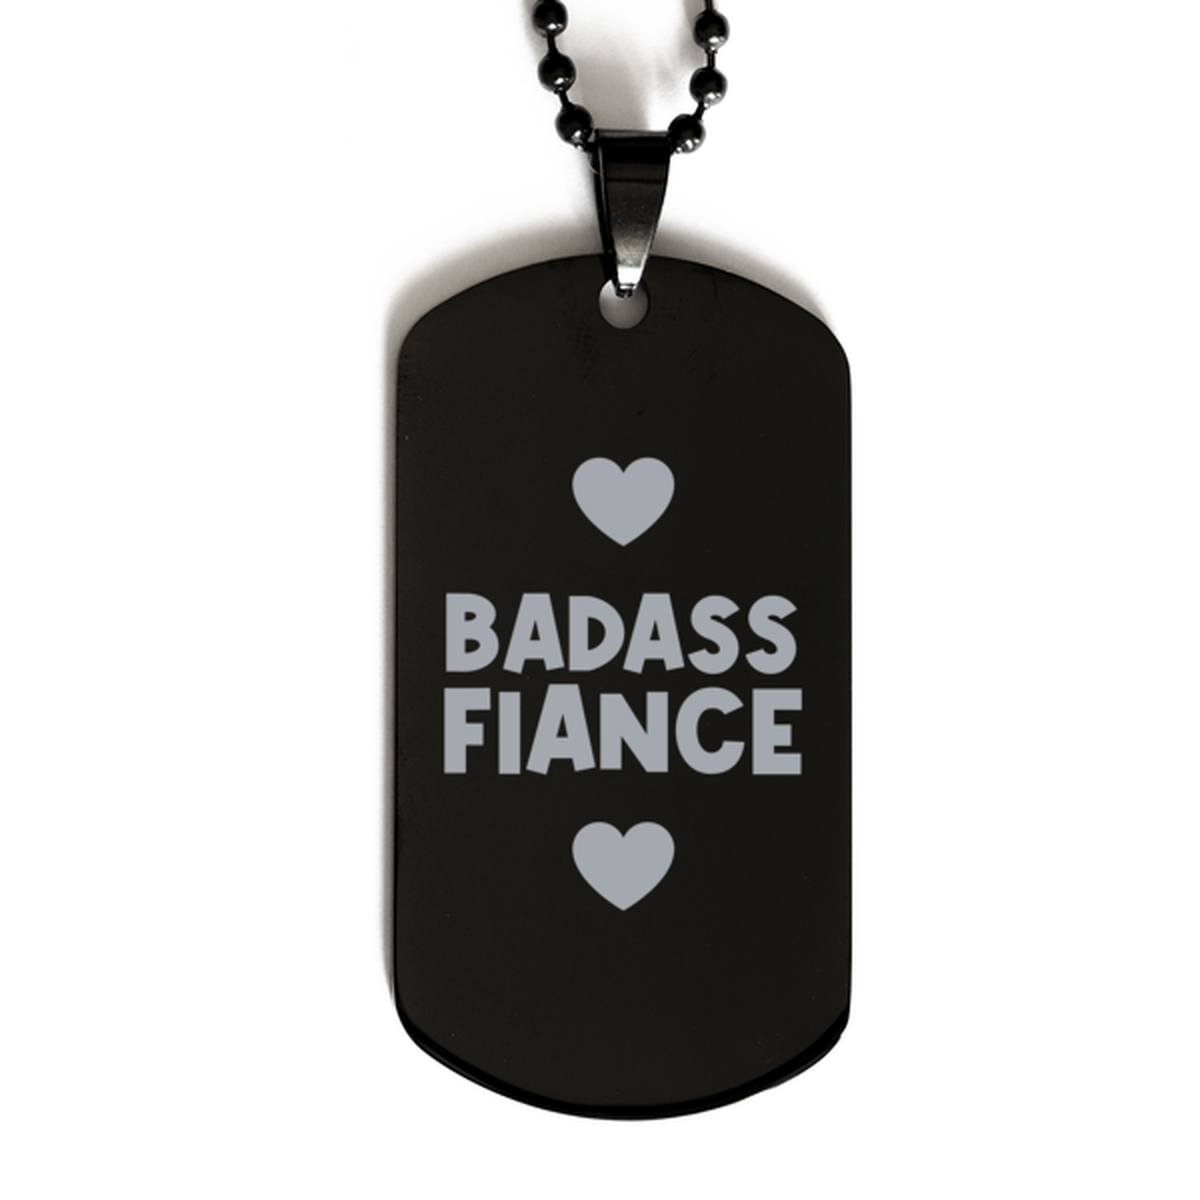 Fiance Black Dog Tag, Badass Fiance, Funny Family Gifts  Necklace For Fiance From Fiancee